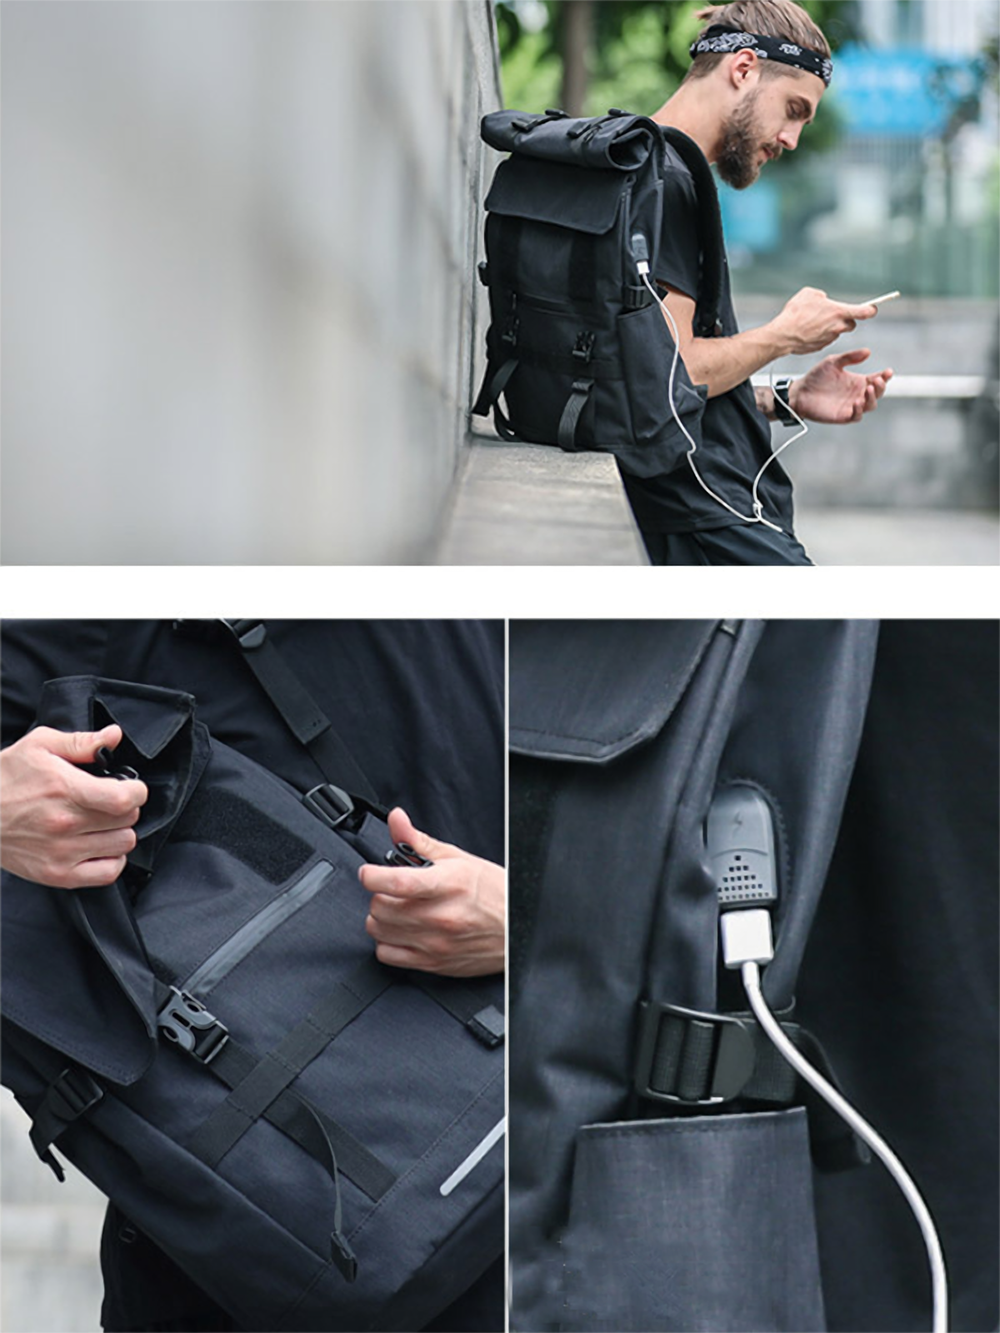 Outdoor-Backpack-Laptop-Bag-Travel-Mountaineering-Bag-Sports-Shoulders-Storage-Bag-with-USB-Charging-1521102